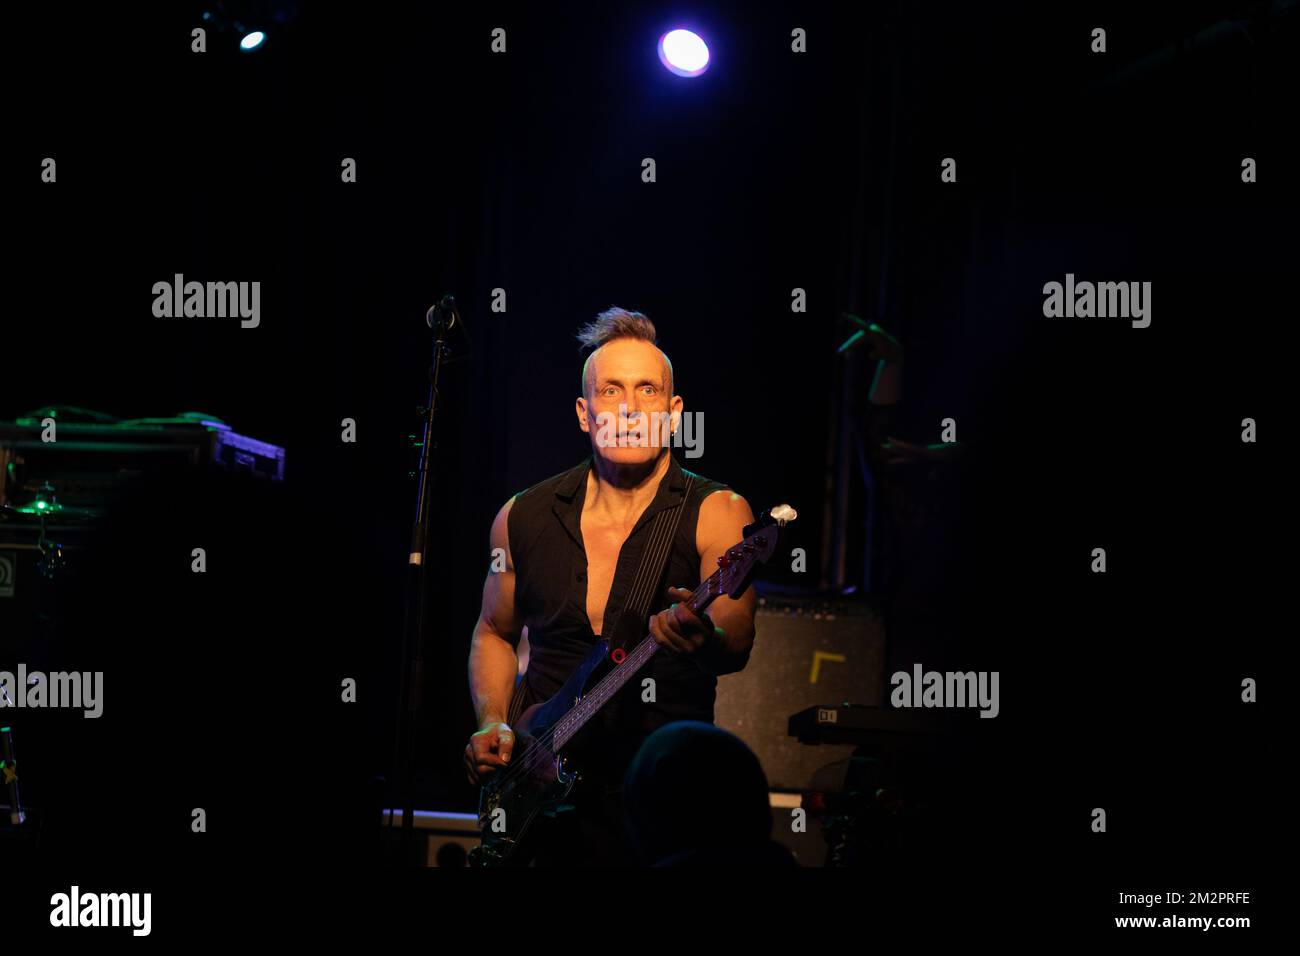 Oxford, United Kingdom. 12th, December 2022. The English post-punk band The Membranes performs a live concert at the O2 Academy Oxford in Oxford. Here singer and bass player John Robb is seen live on stage. (Photo credit: Gonzales Photo – Per-Otto Oppi). Stock Photo